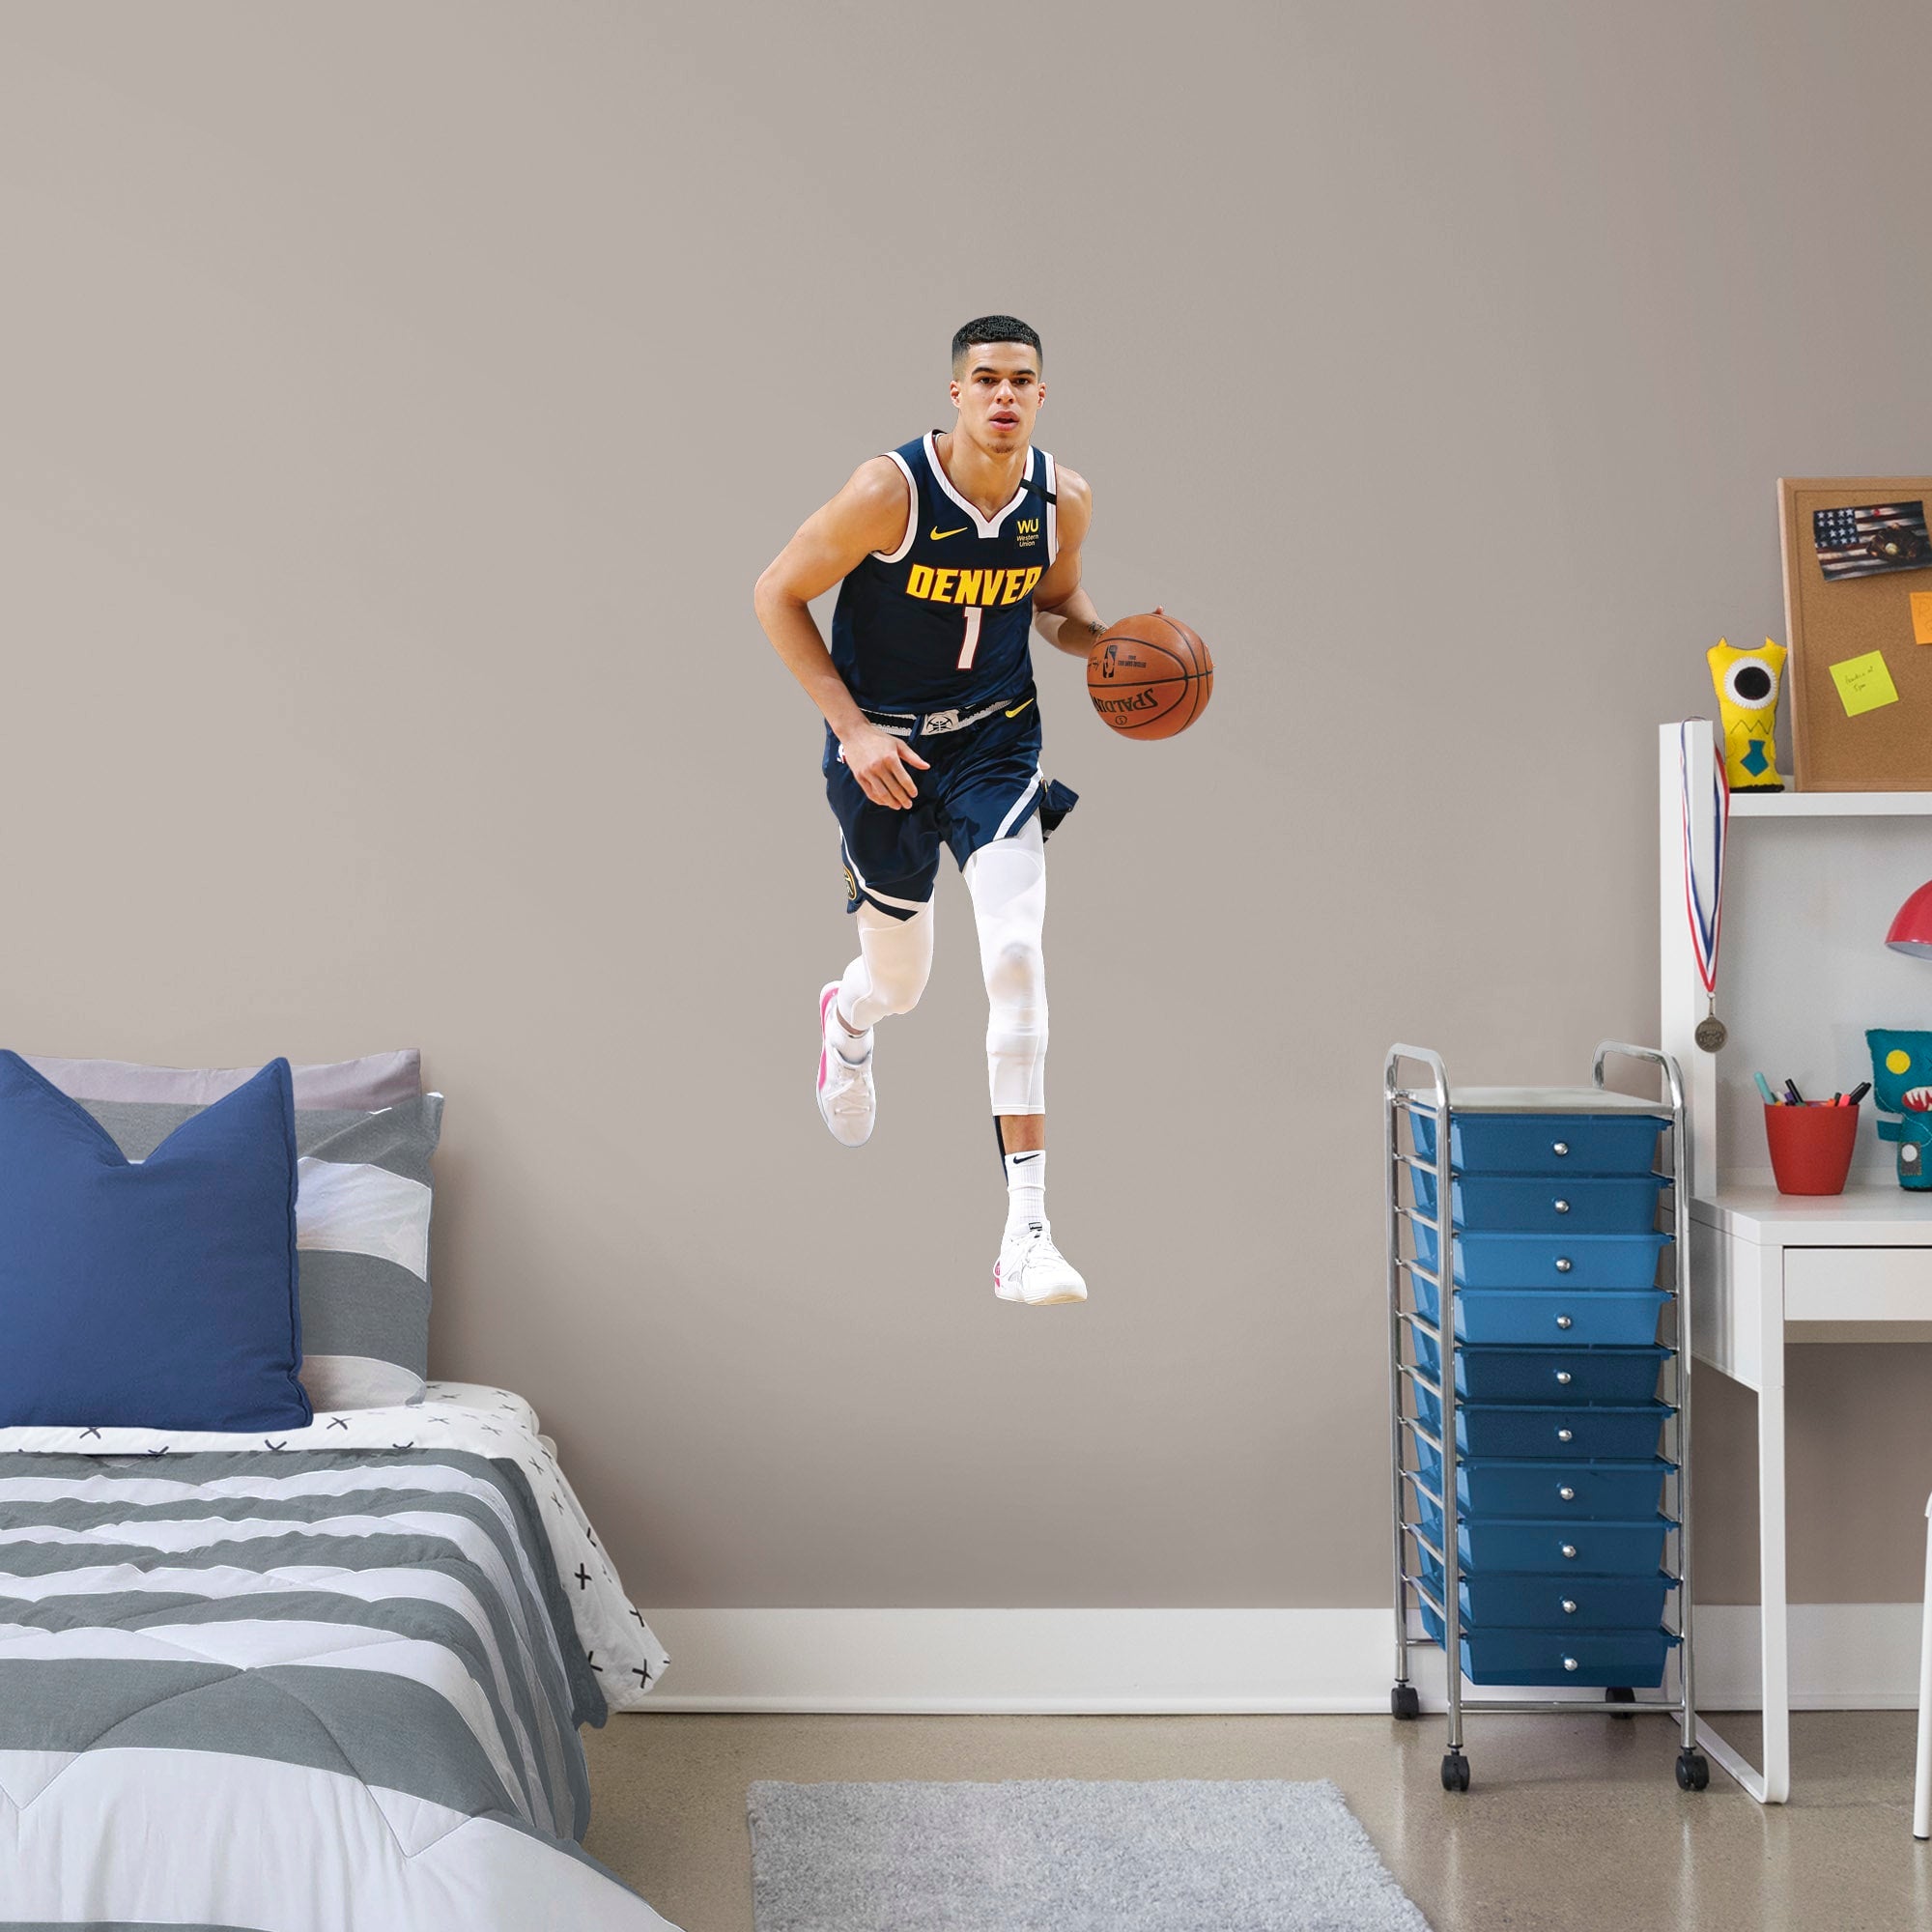 Michael Porter Jr. for Denver Nuggets - Officially Licensed NBA Removable Wall Decal Giant Athlete + 2 Decals (24"W x 51"H) by F